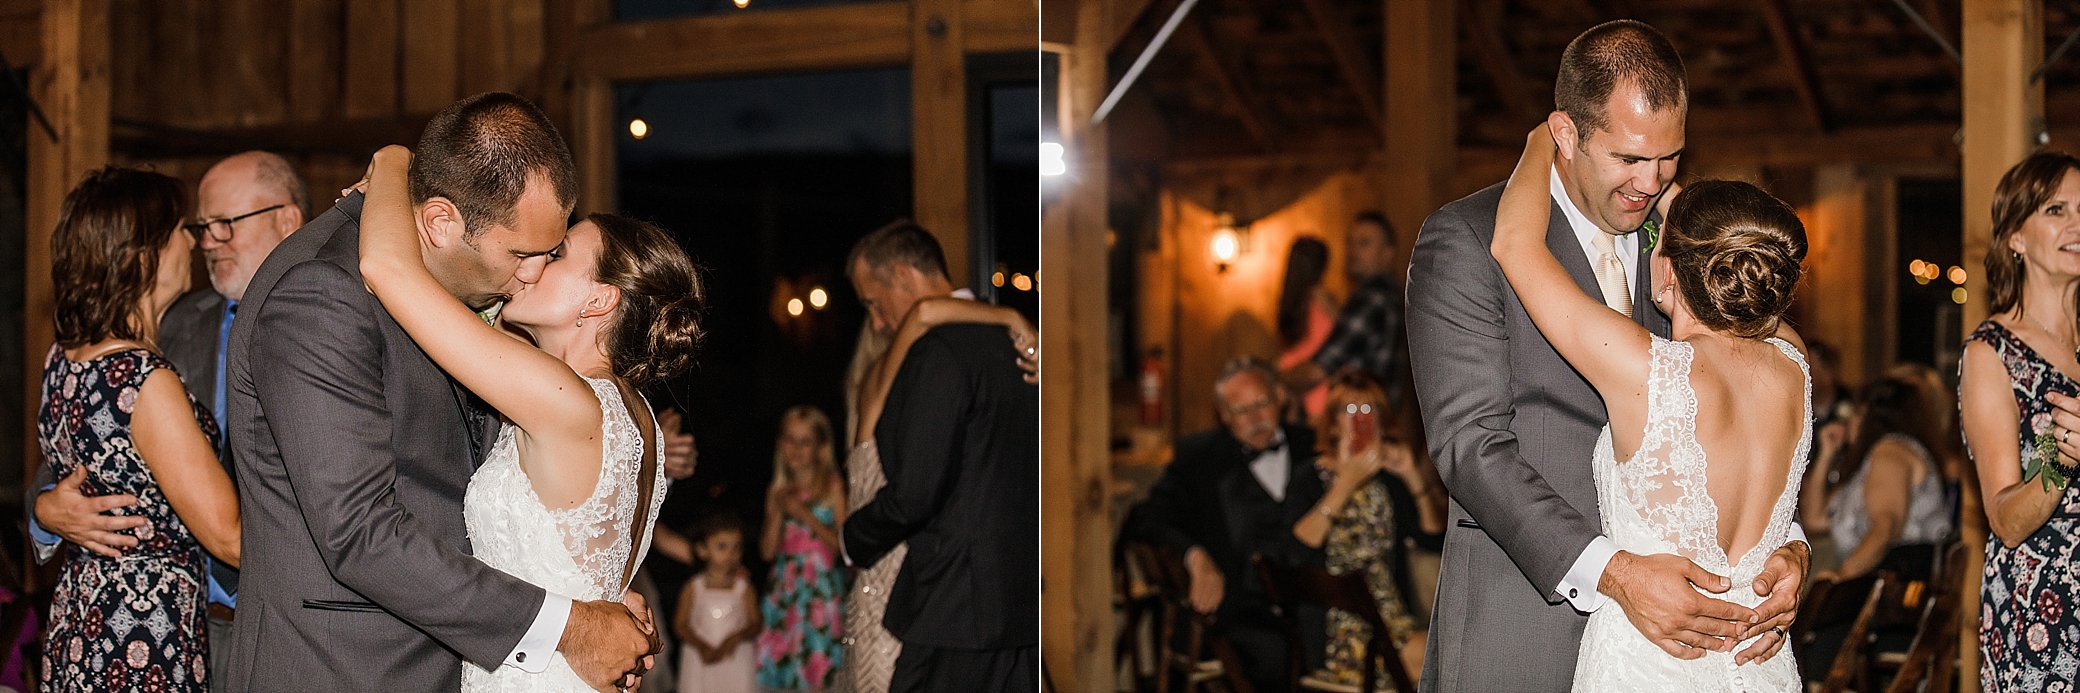 Bride and groom first dance at wedding reception at The Cattle Barn | Megan Montalvo Photography 